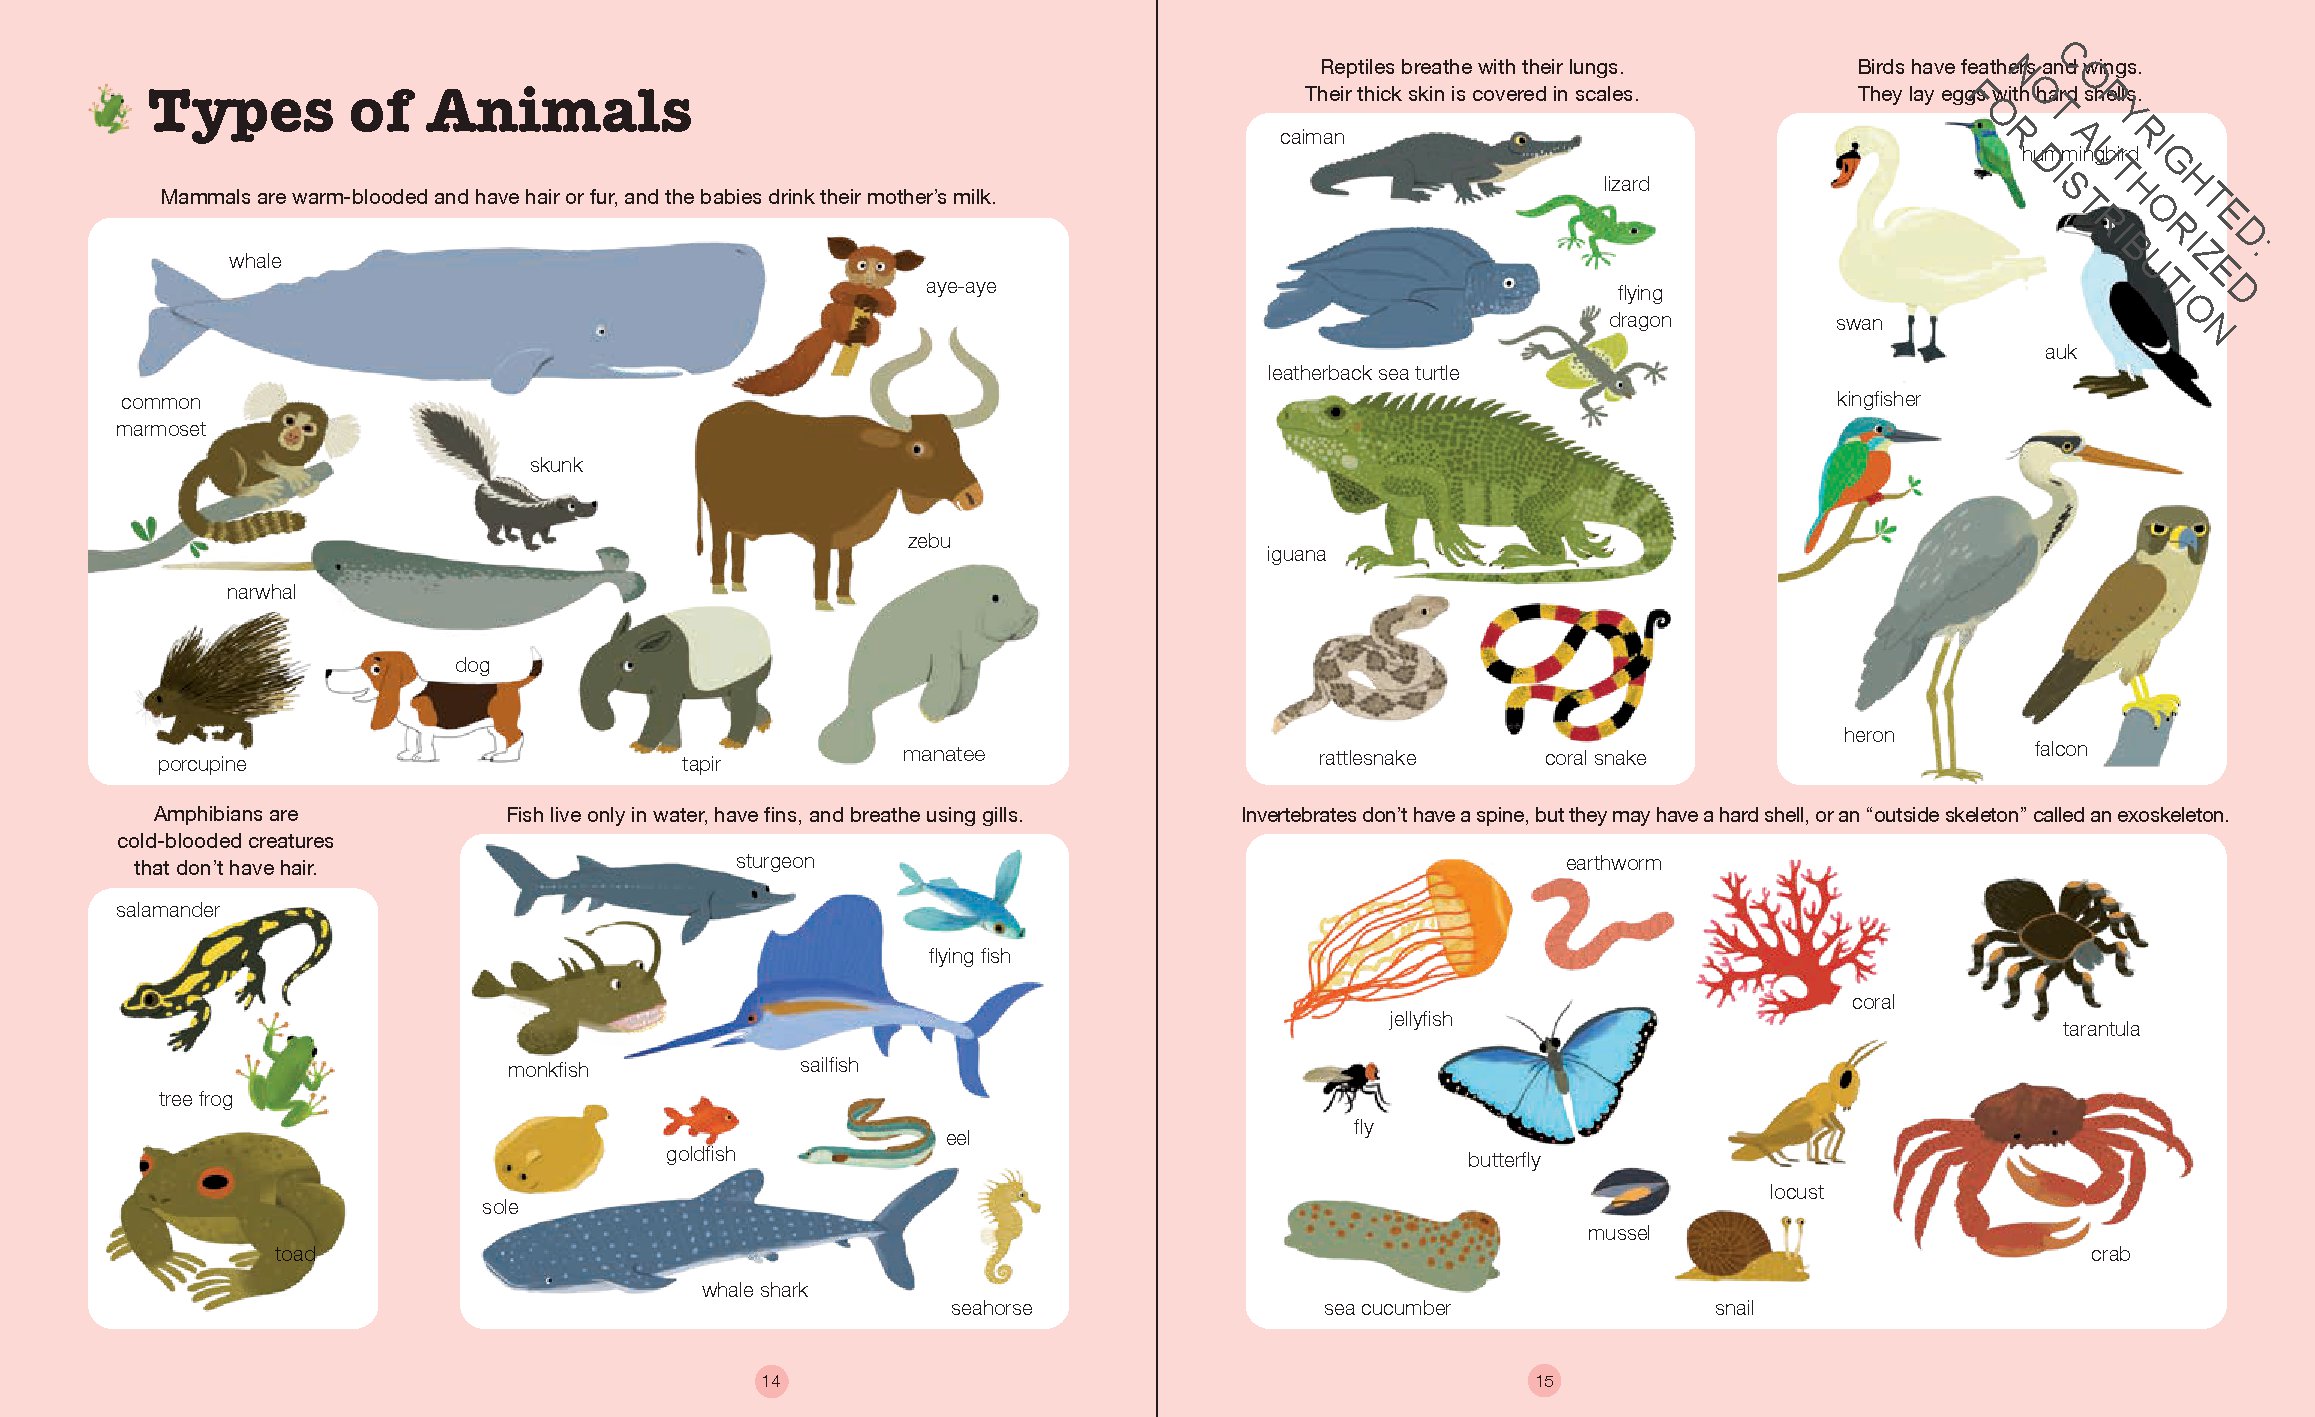 Do You Know?: Animals of Land, Sea, and Air